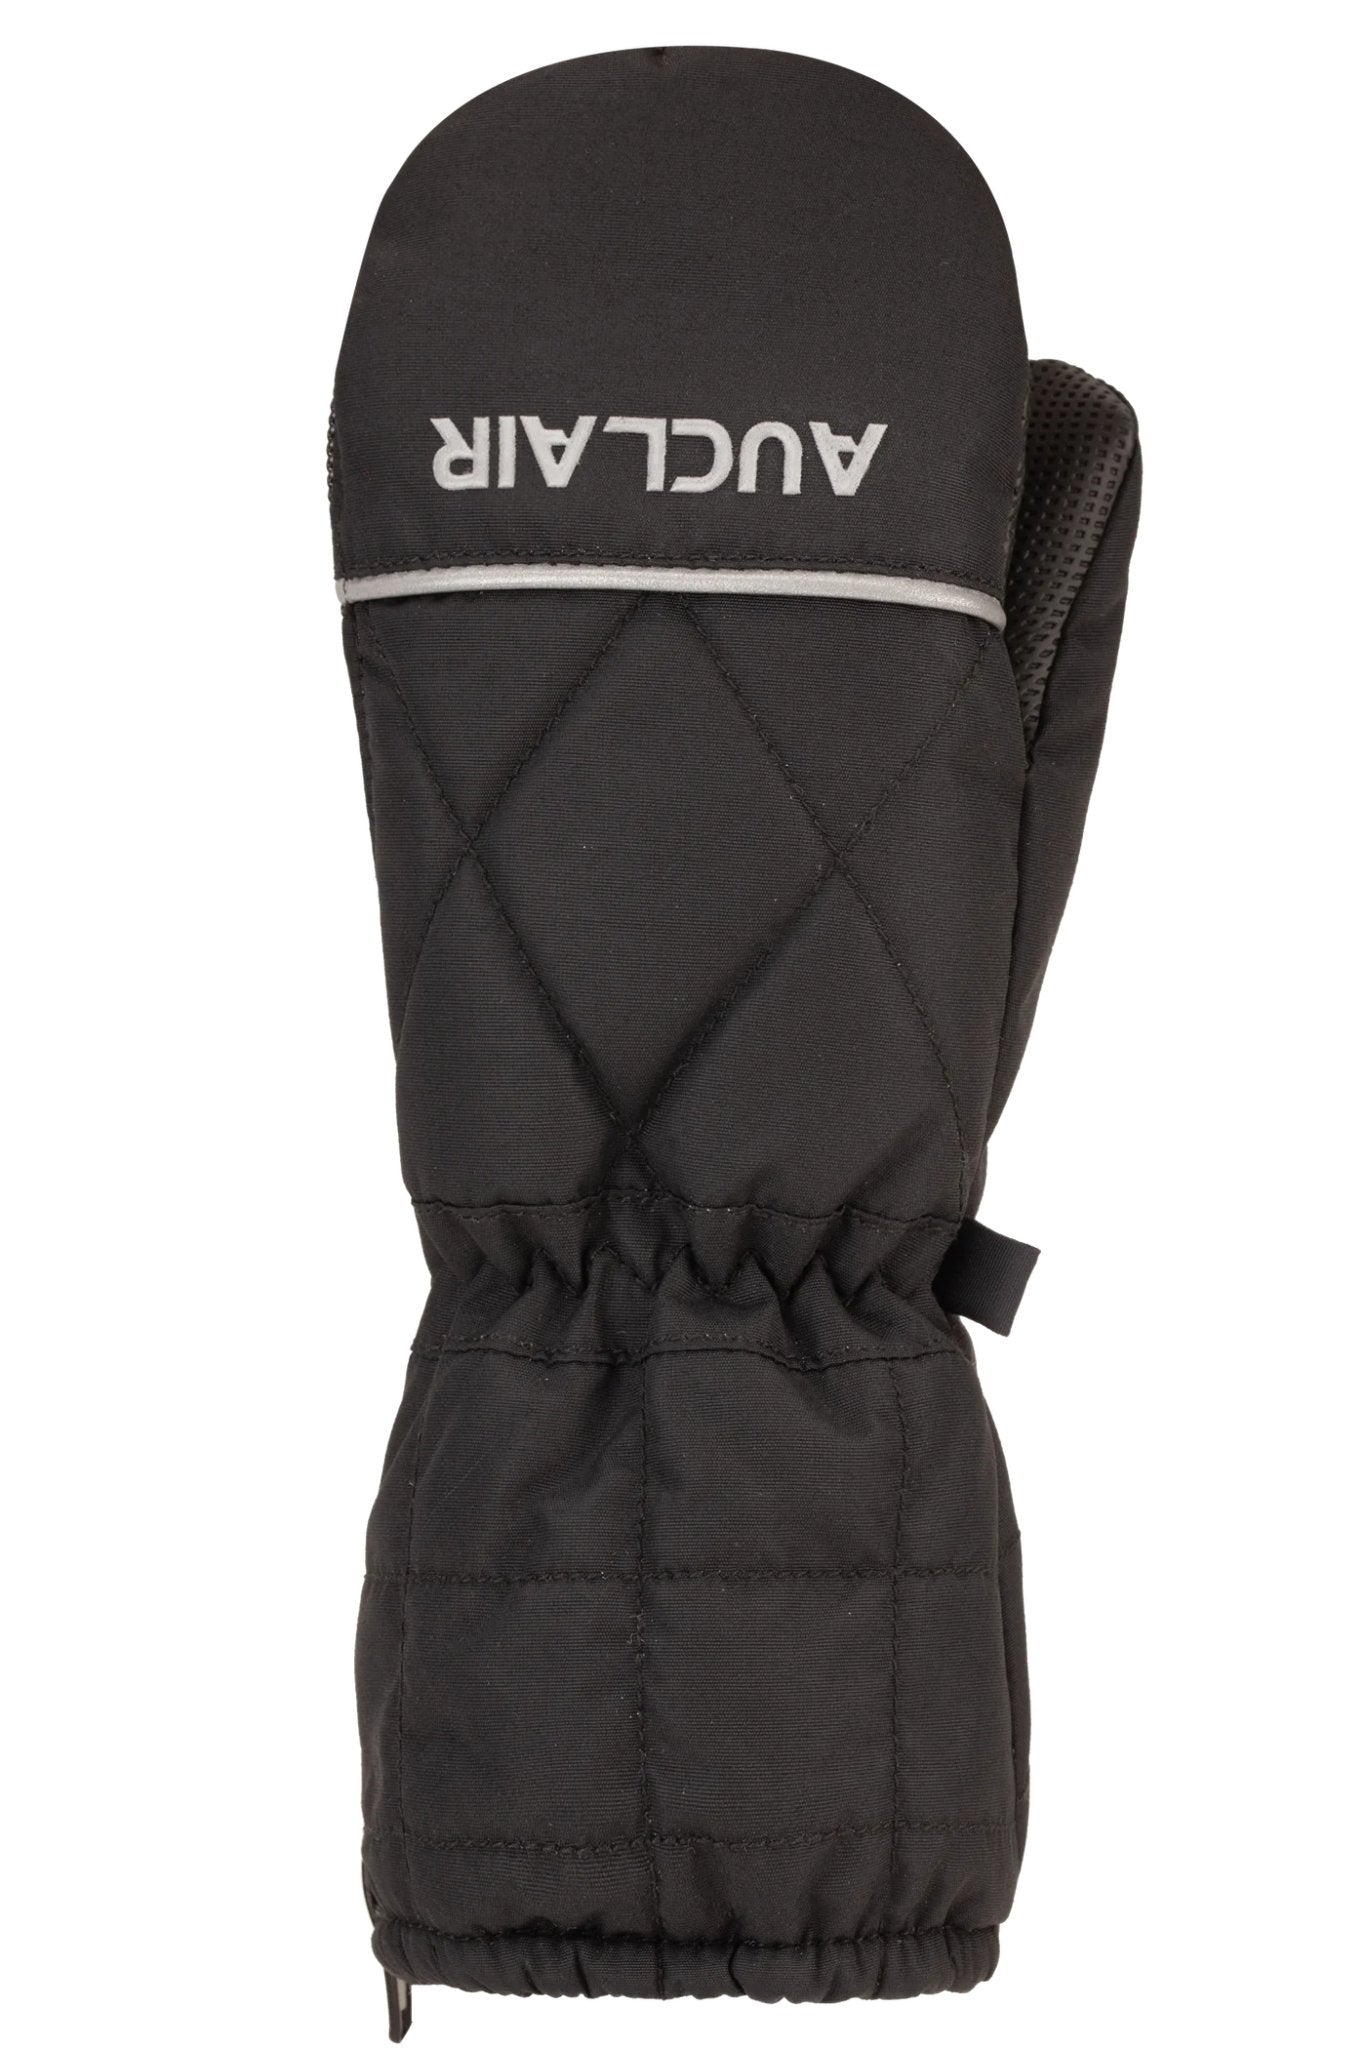 Auclair Quilted Mitts Tots Black - FULLSEND SKI AND OUTDOOR